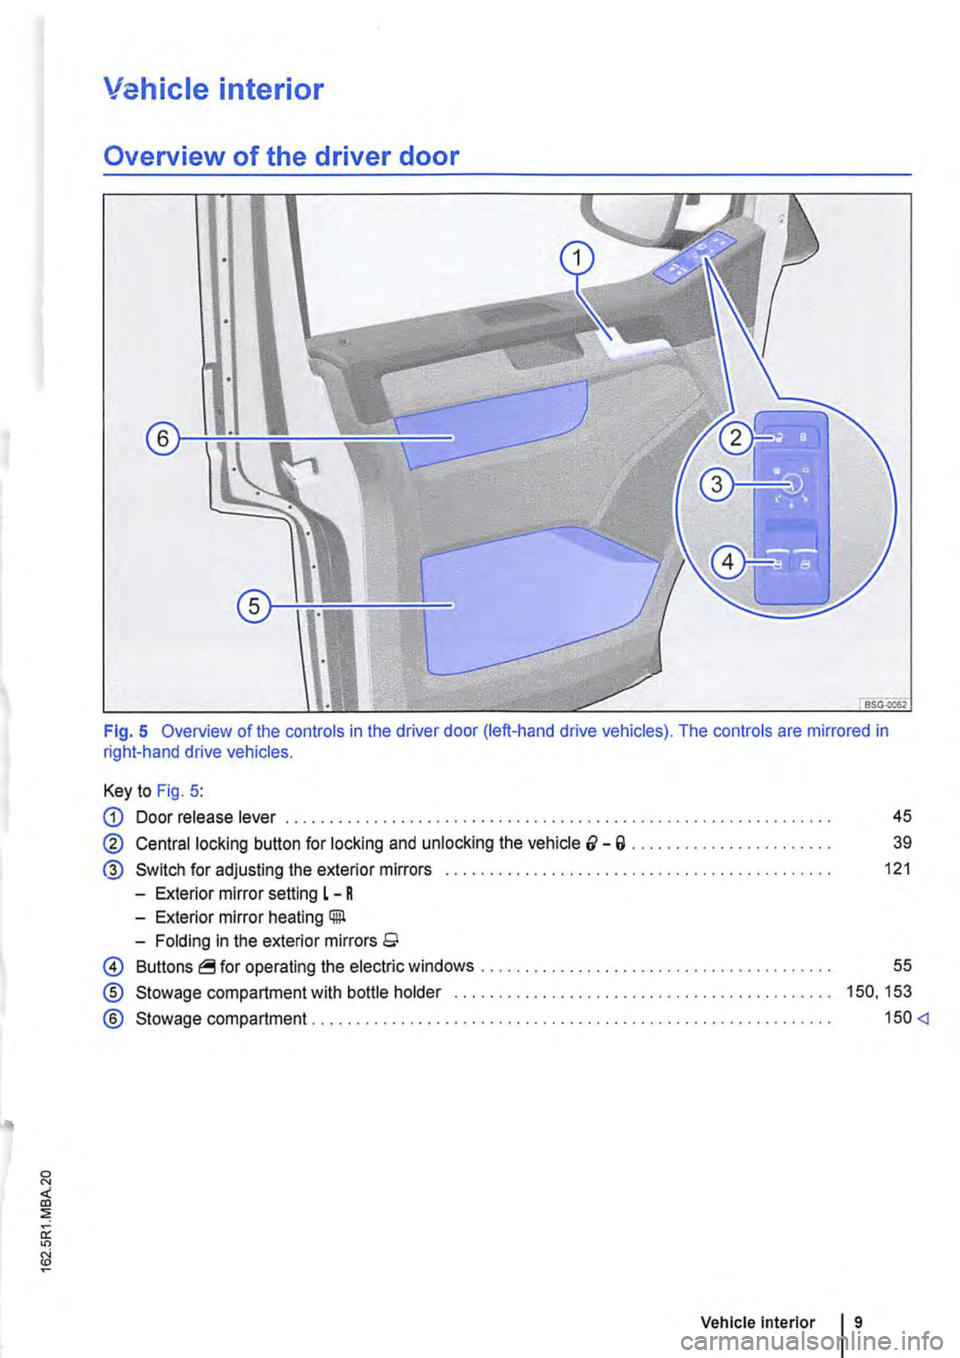 VOLKSWAGEN TRANSPORTER 2014  Owners Manual Vehicle interior 
Overview of the driver door 
Fig. 5 Overview of the controls in the driver door (left-hand drive vehicles). The controls are mirrored in right-hand drive vehicles. 
Key to Fig. 5: 
G